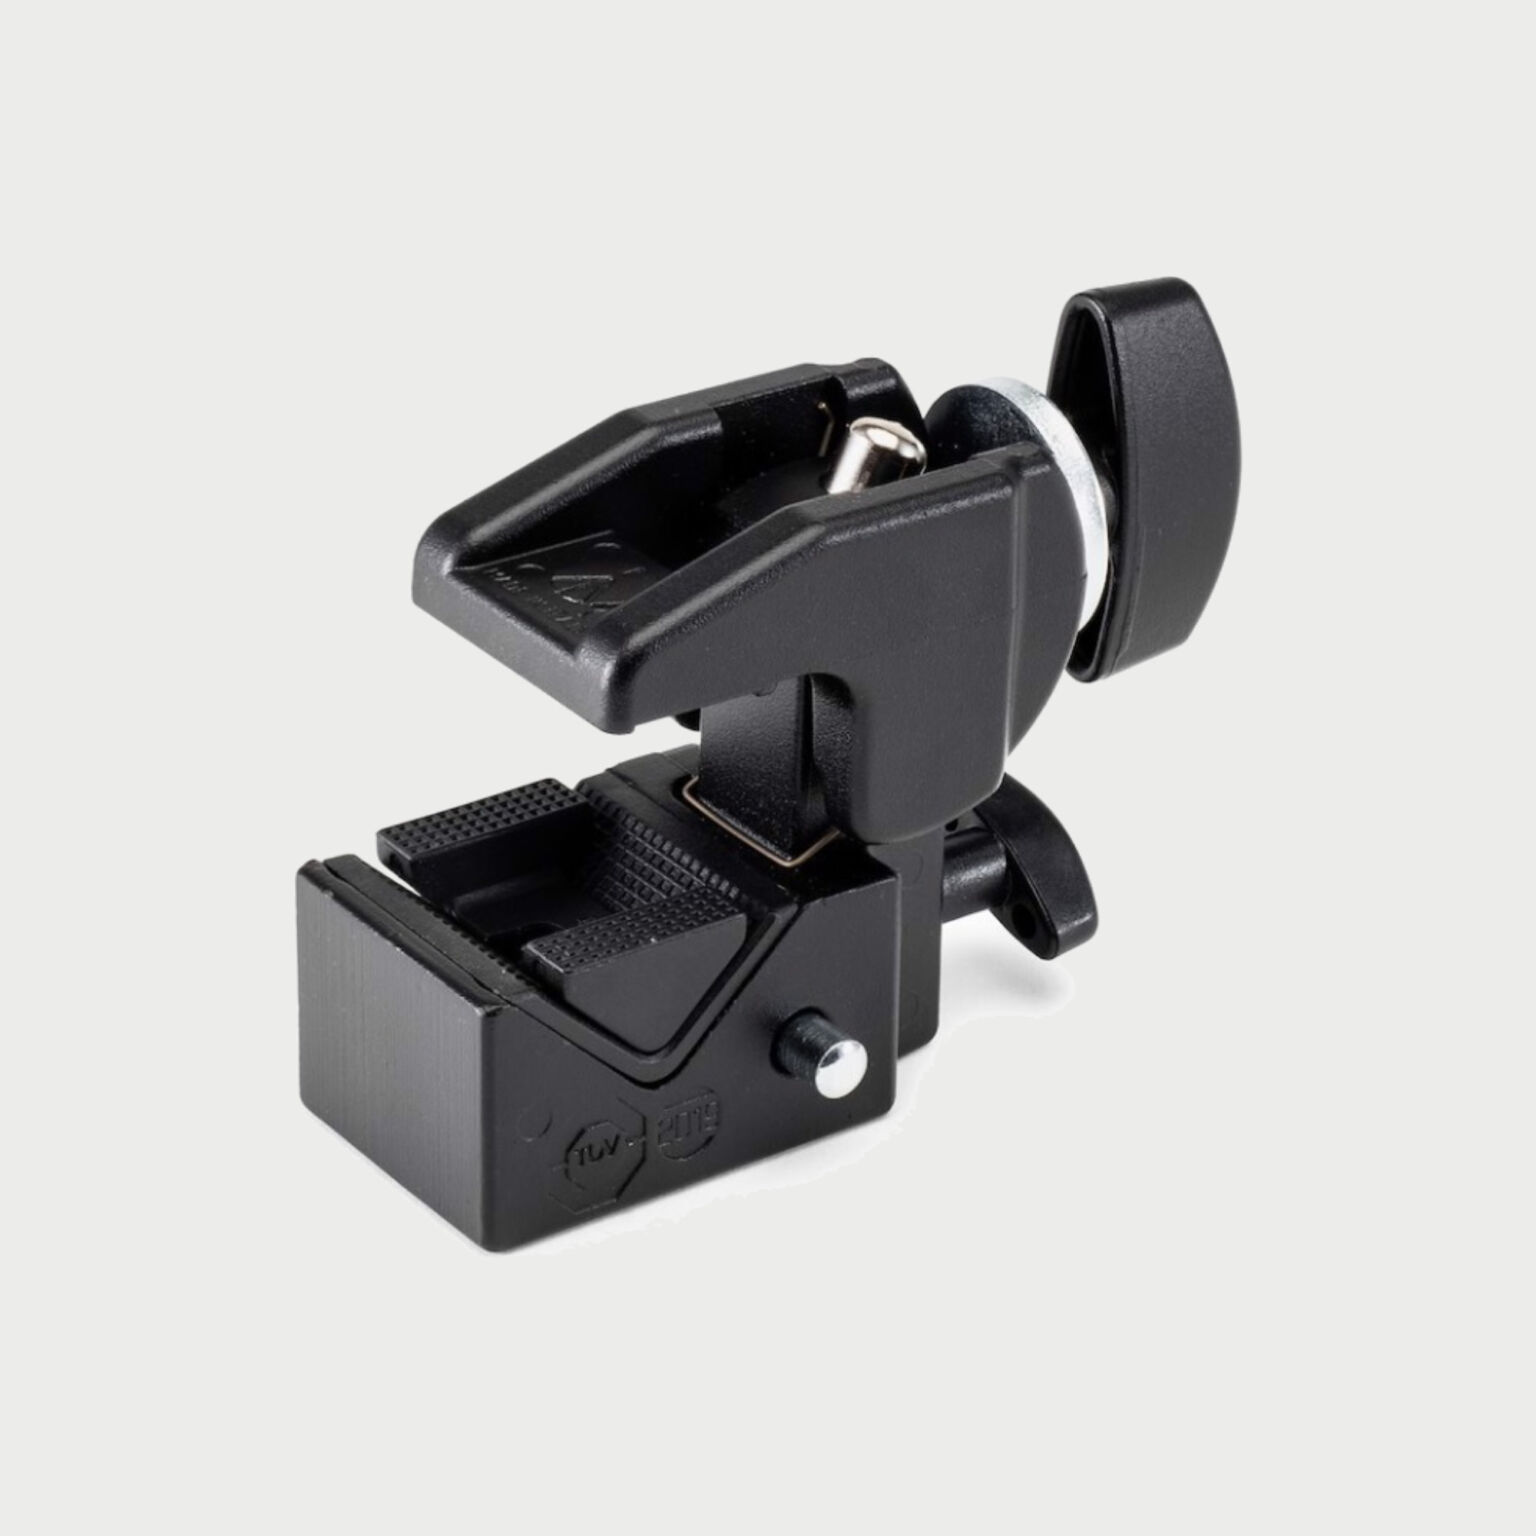 Manfrotto Quick Action Super Clamp